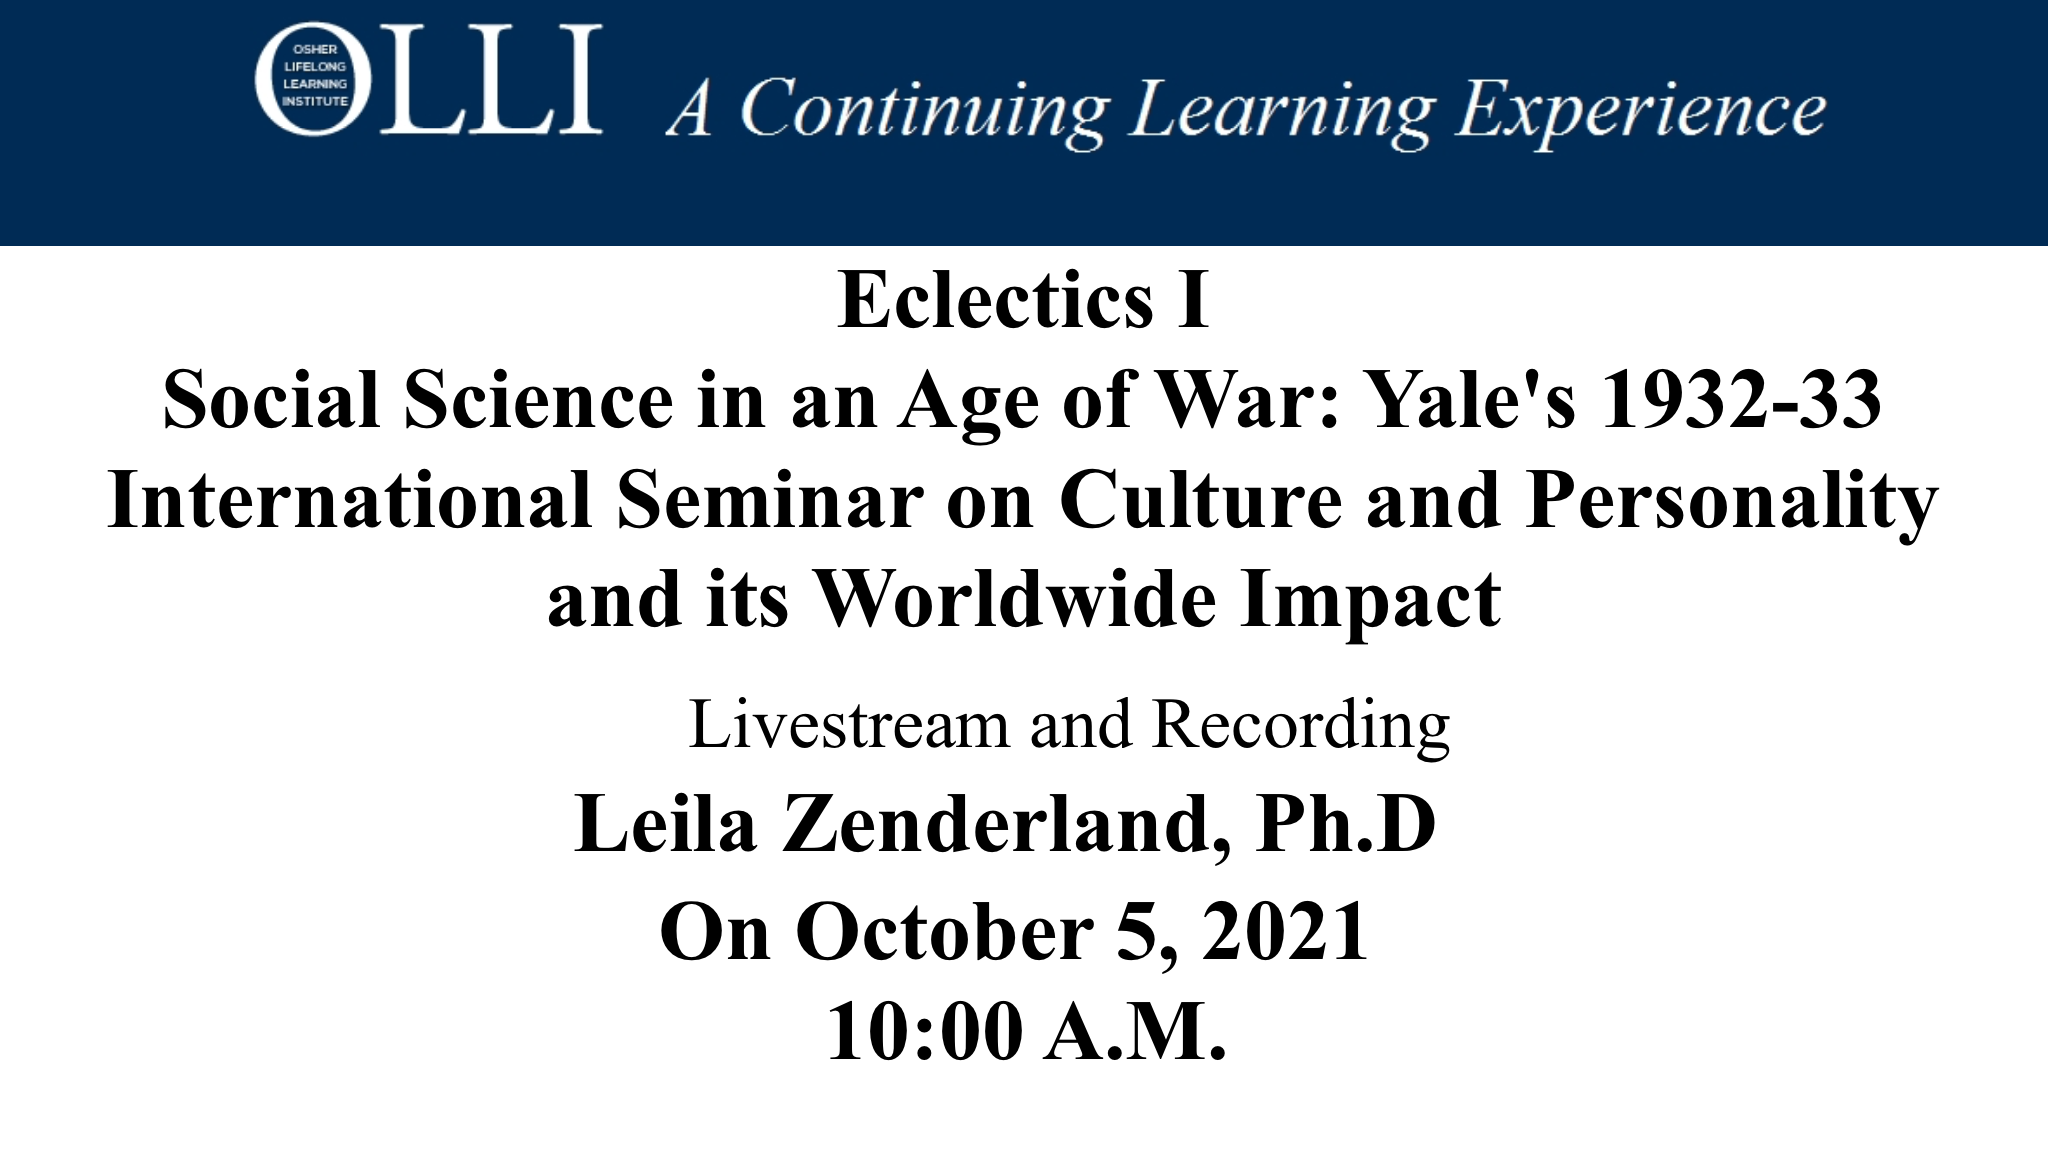 Click here to view the livestream of Eclectics 1 - Social Science in an Age of War